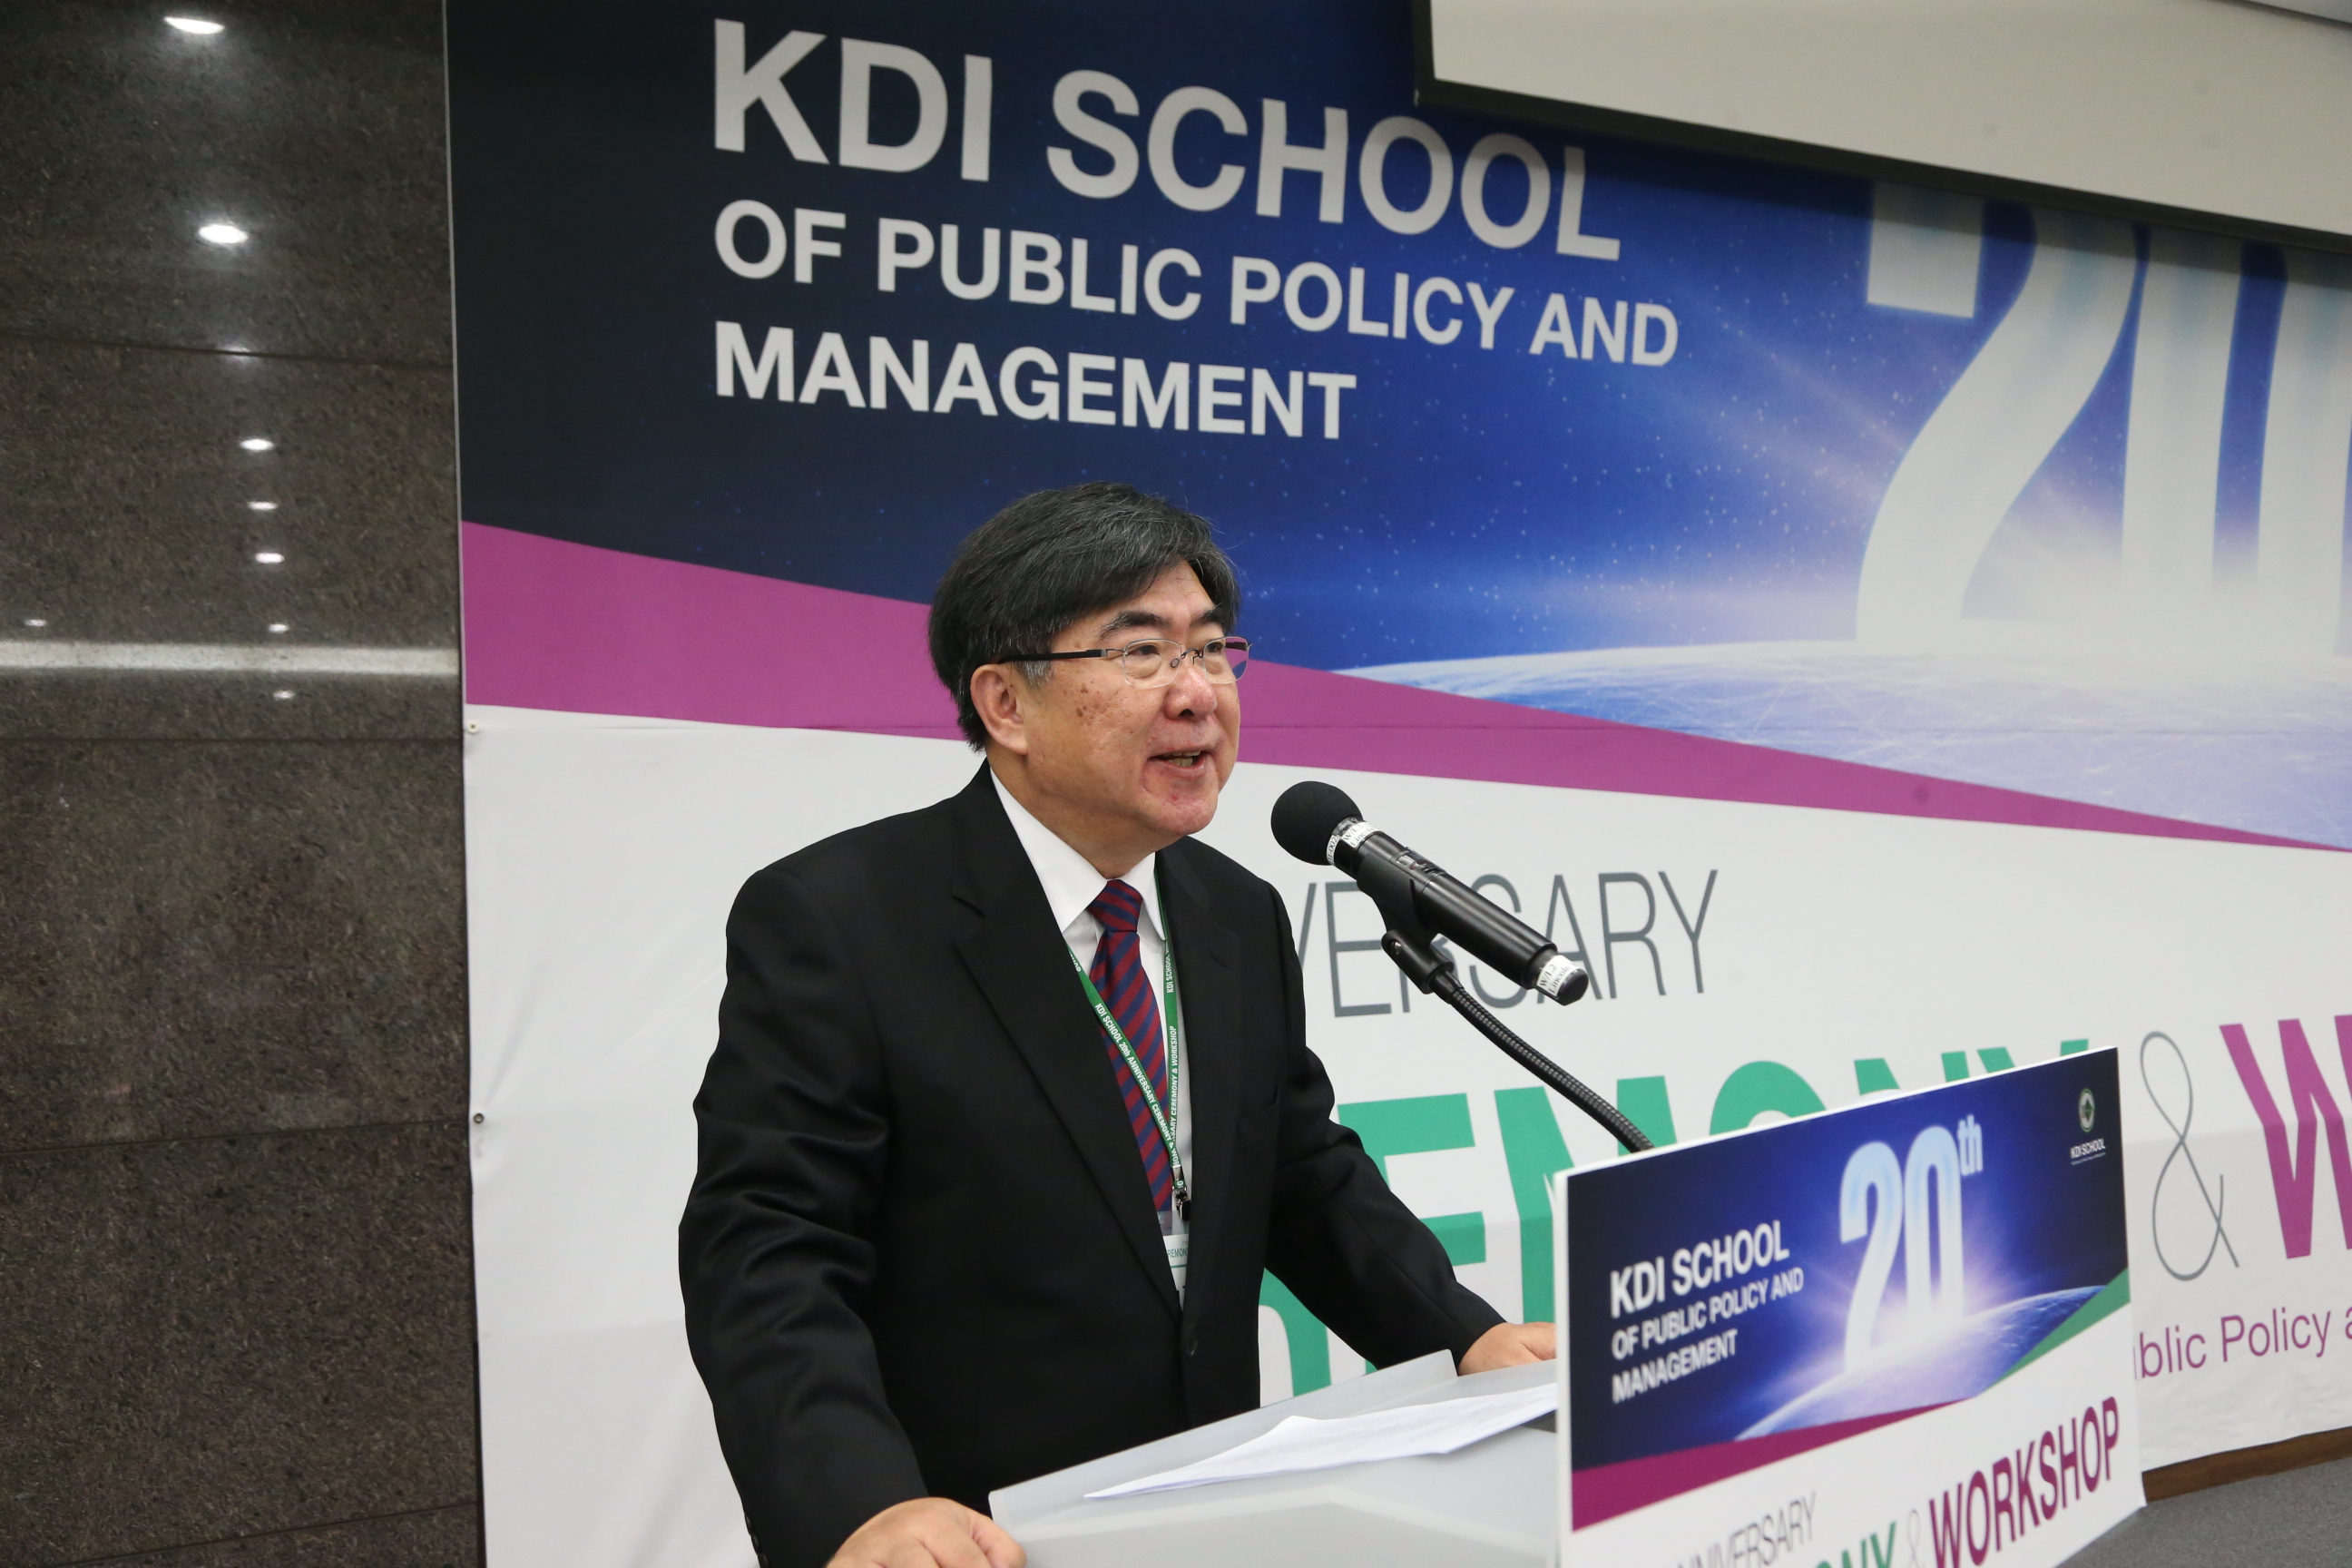 Overview of KDI School's 20 years